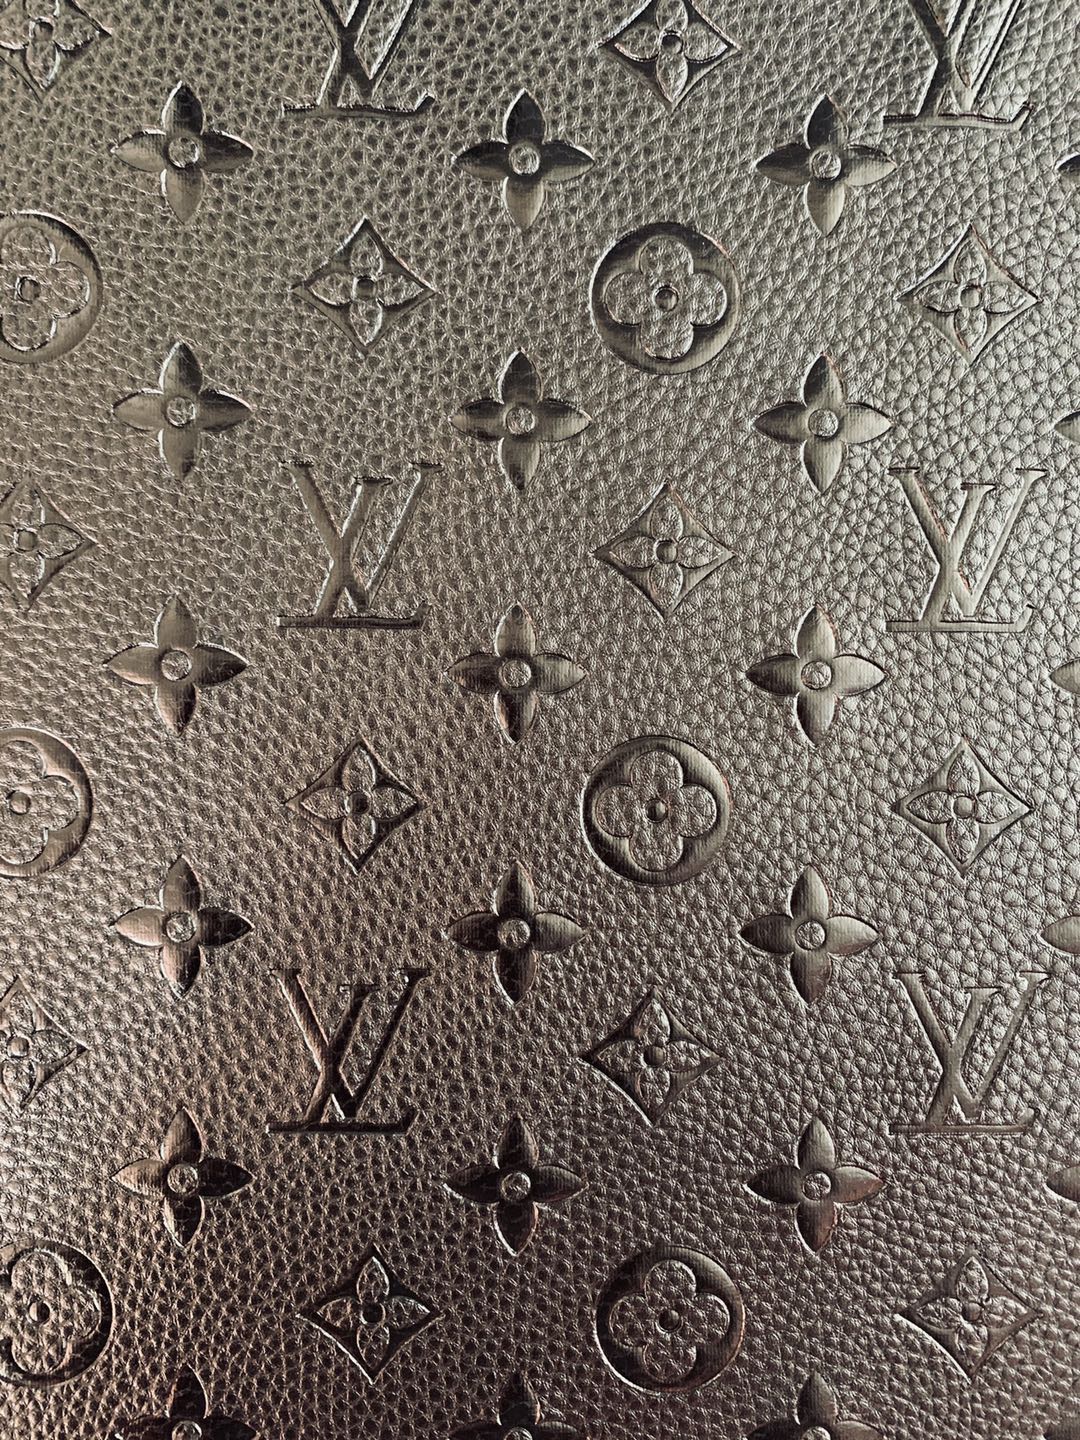 Fashion Embossed LV Crafting Leather Fabric For Handmade Bags ,Shoes and DIY Handicrafts By Yards (Black)